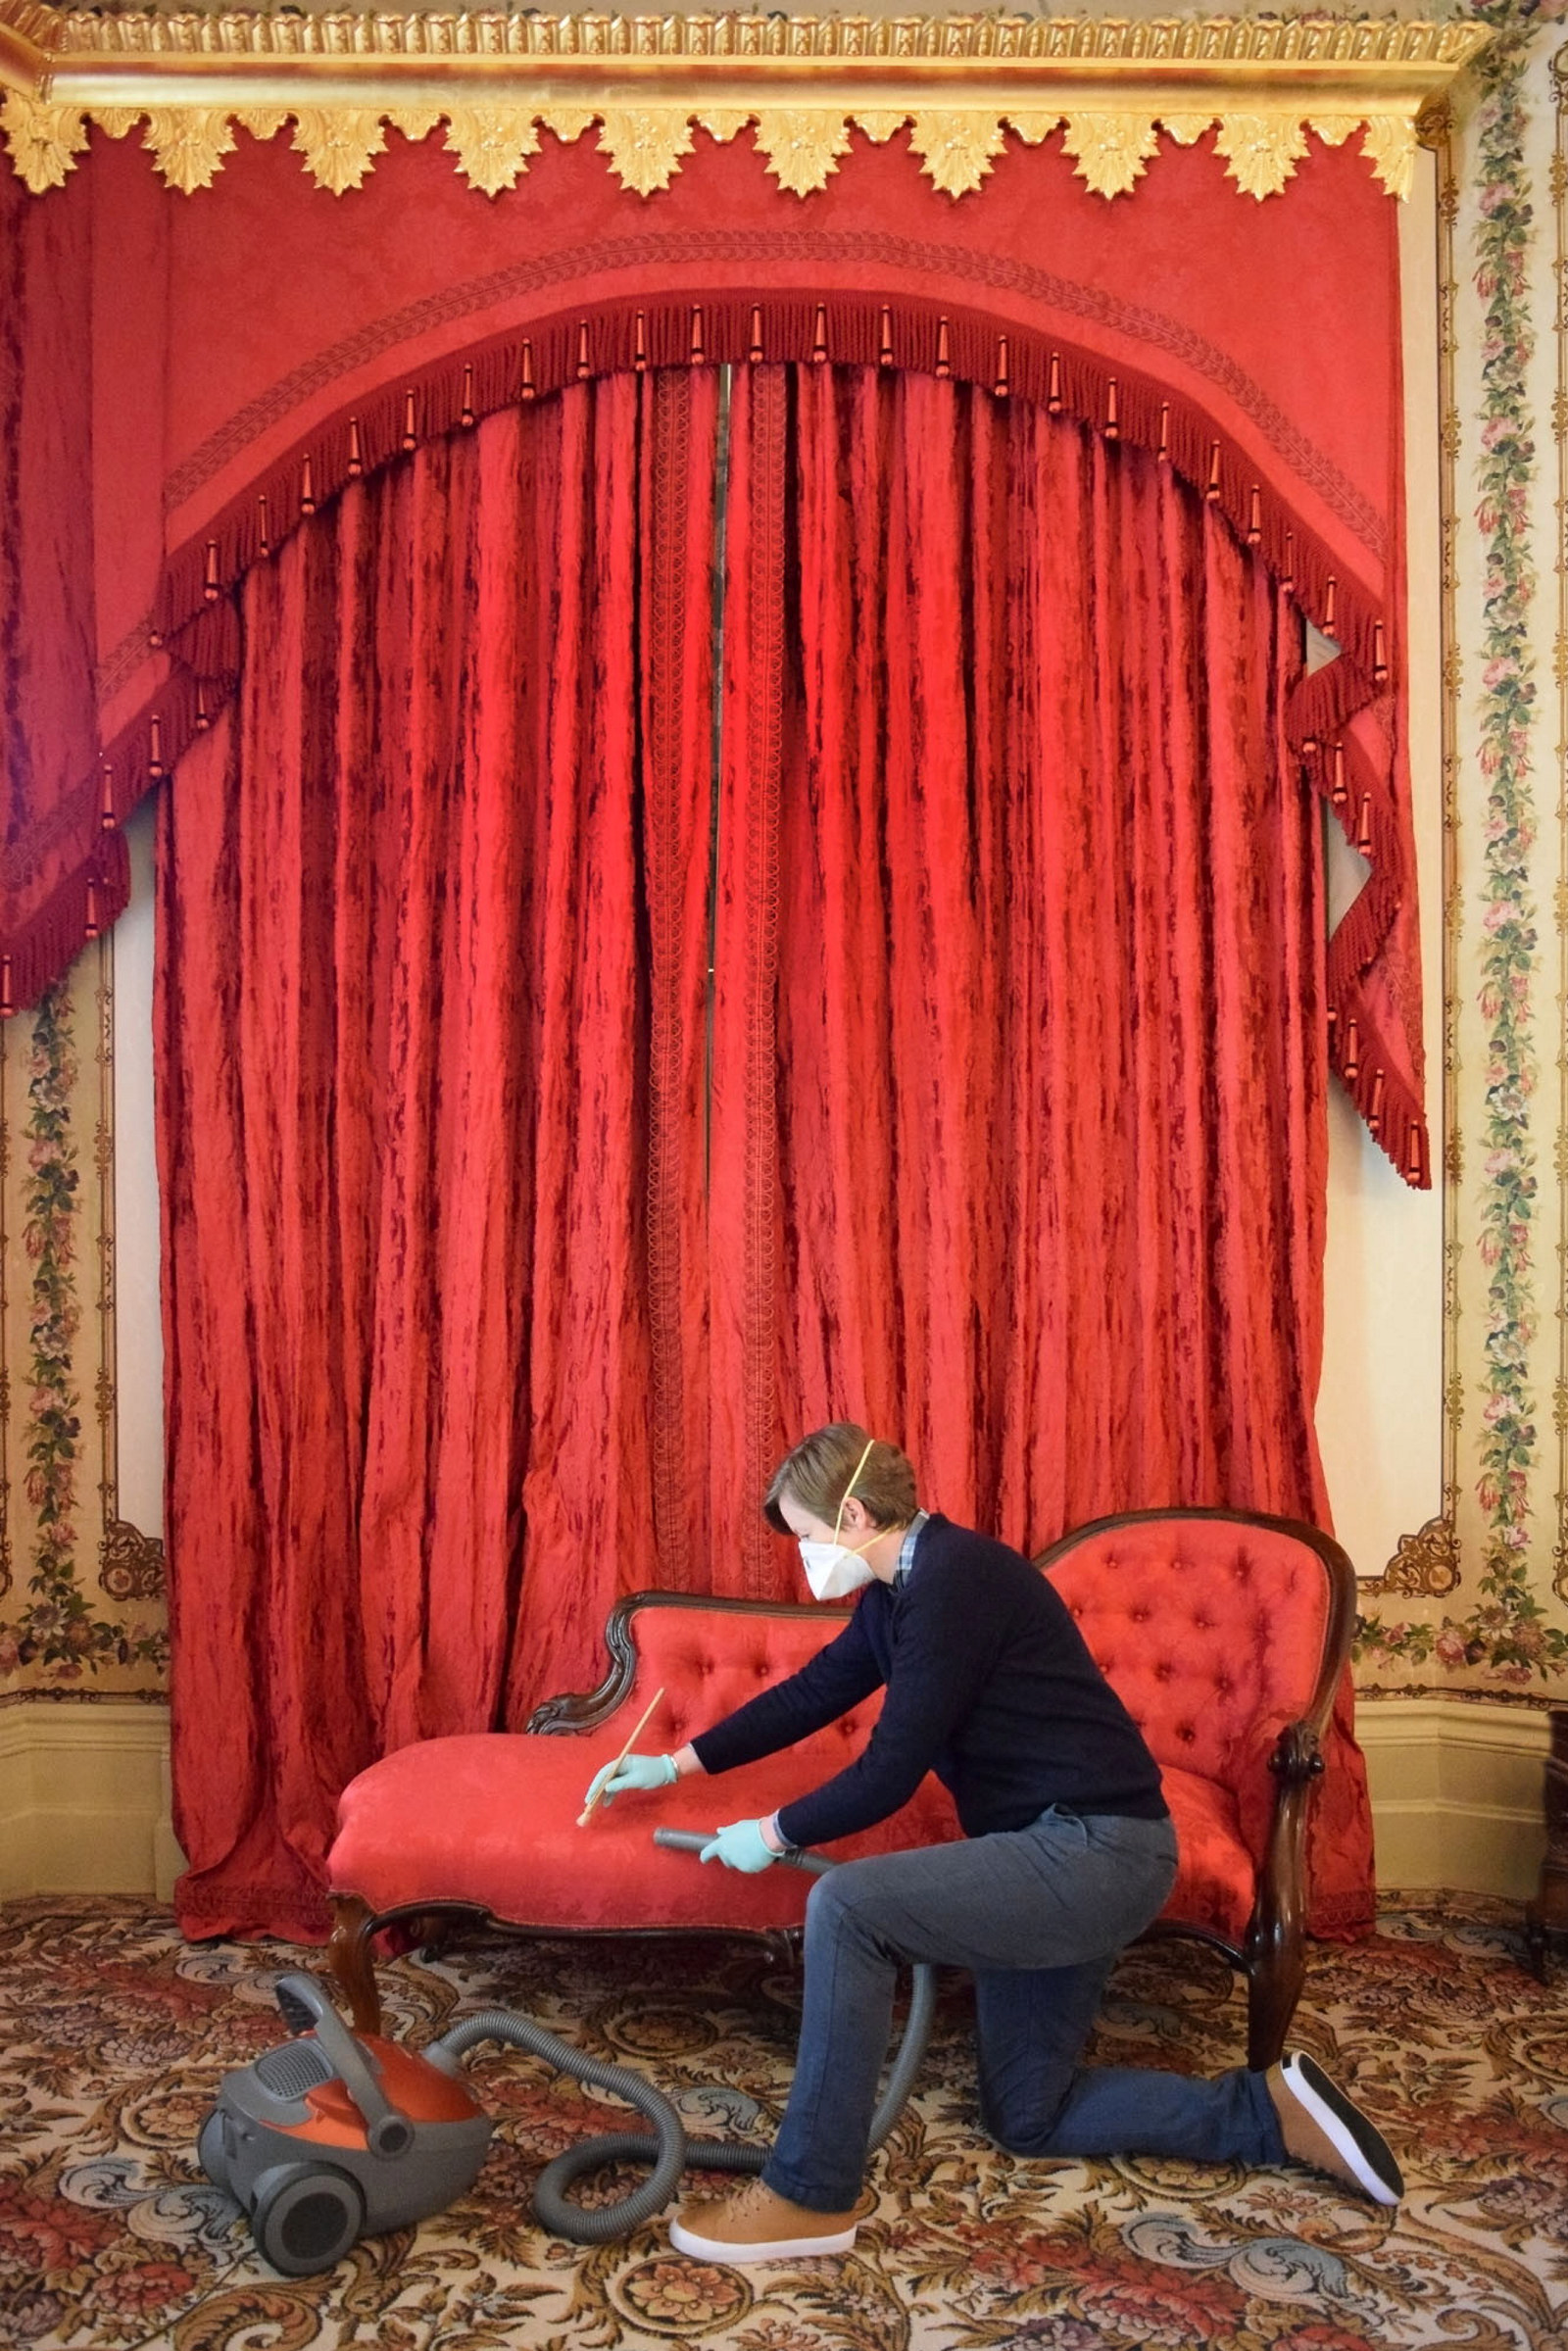 Person kneeling in front of red furniture and drapes.